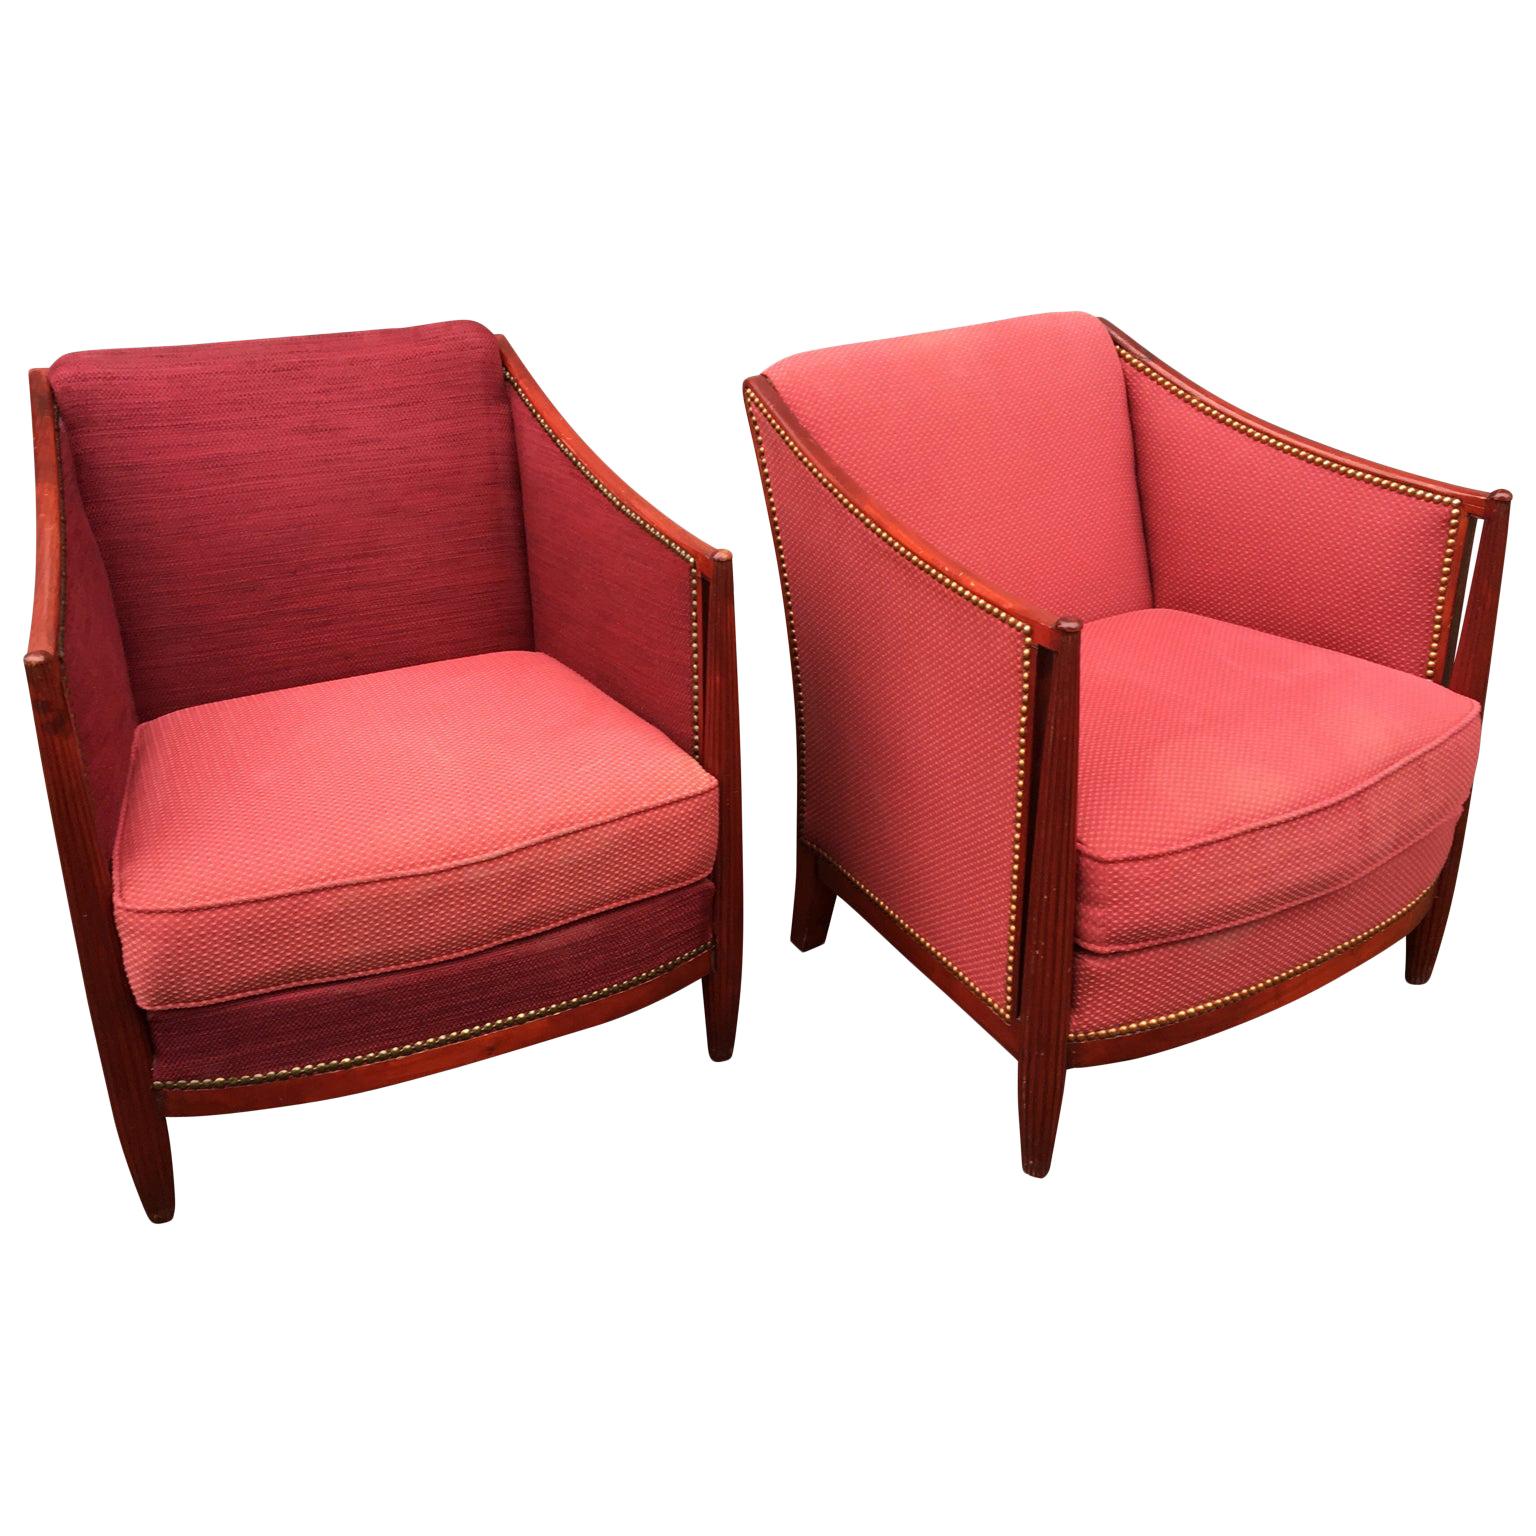 Pair of French Art Deco Lounge Chairs